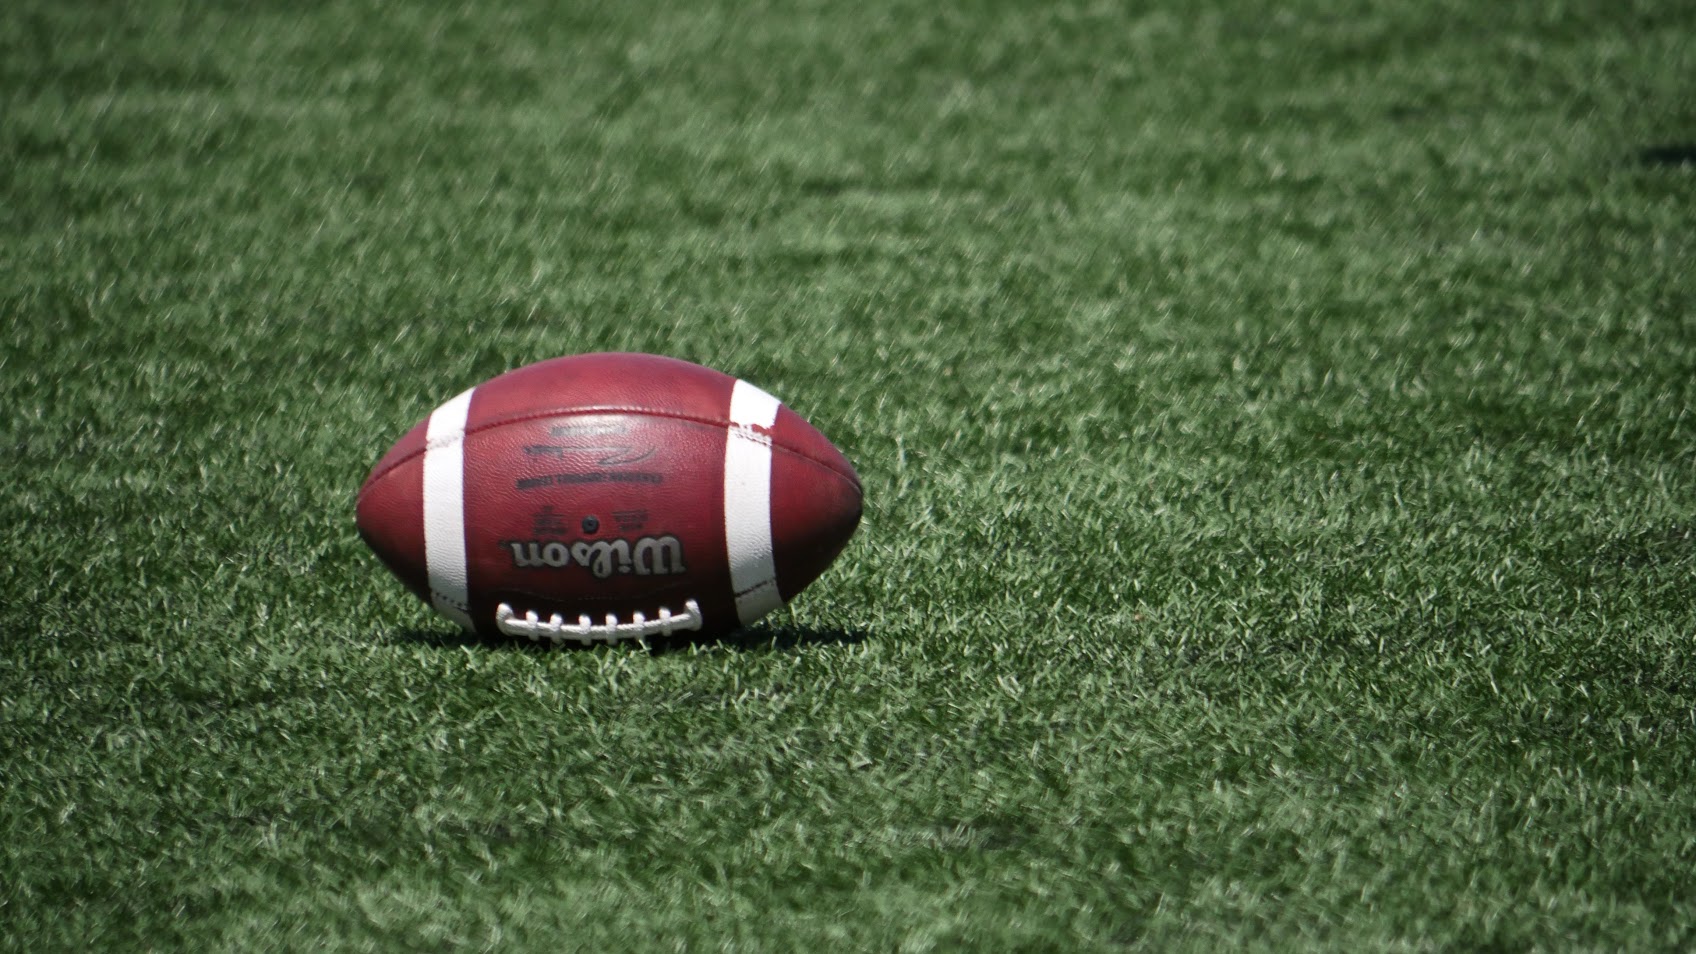 Ring missing for six years unearthed under football field - 660 NEWS